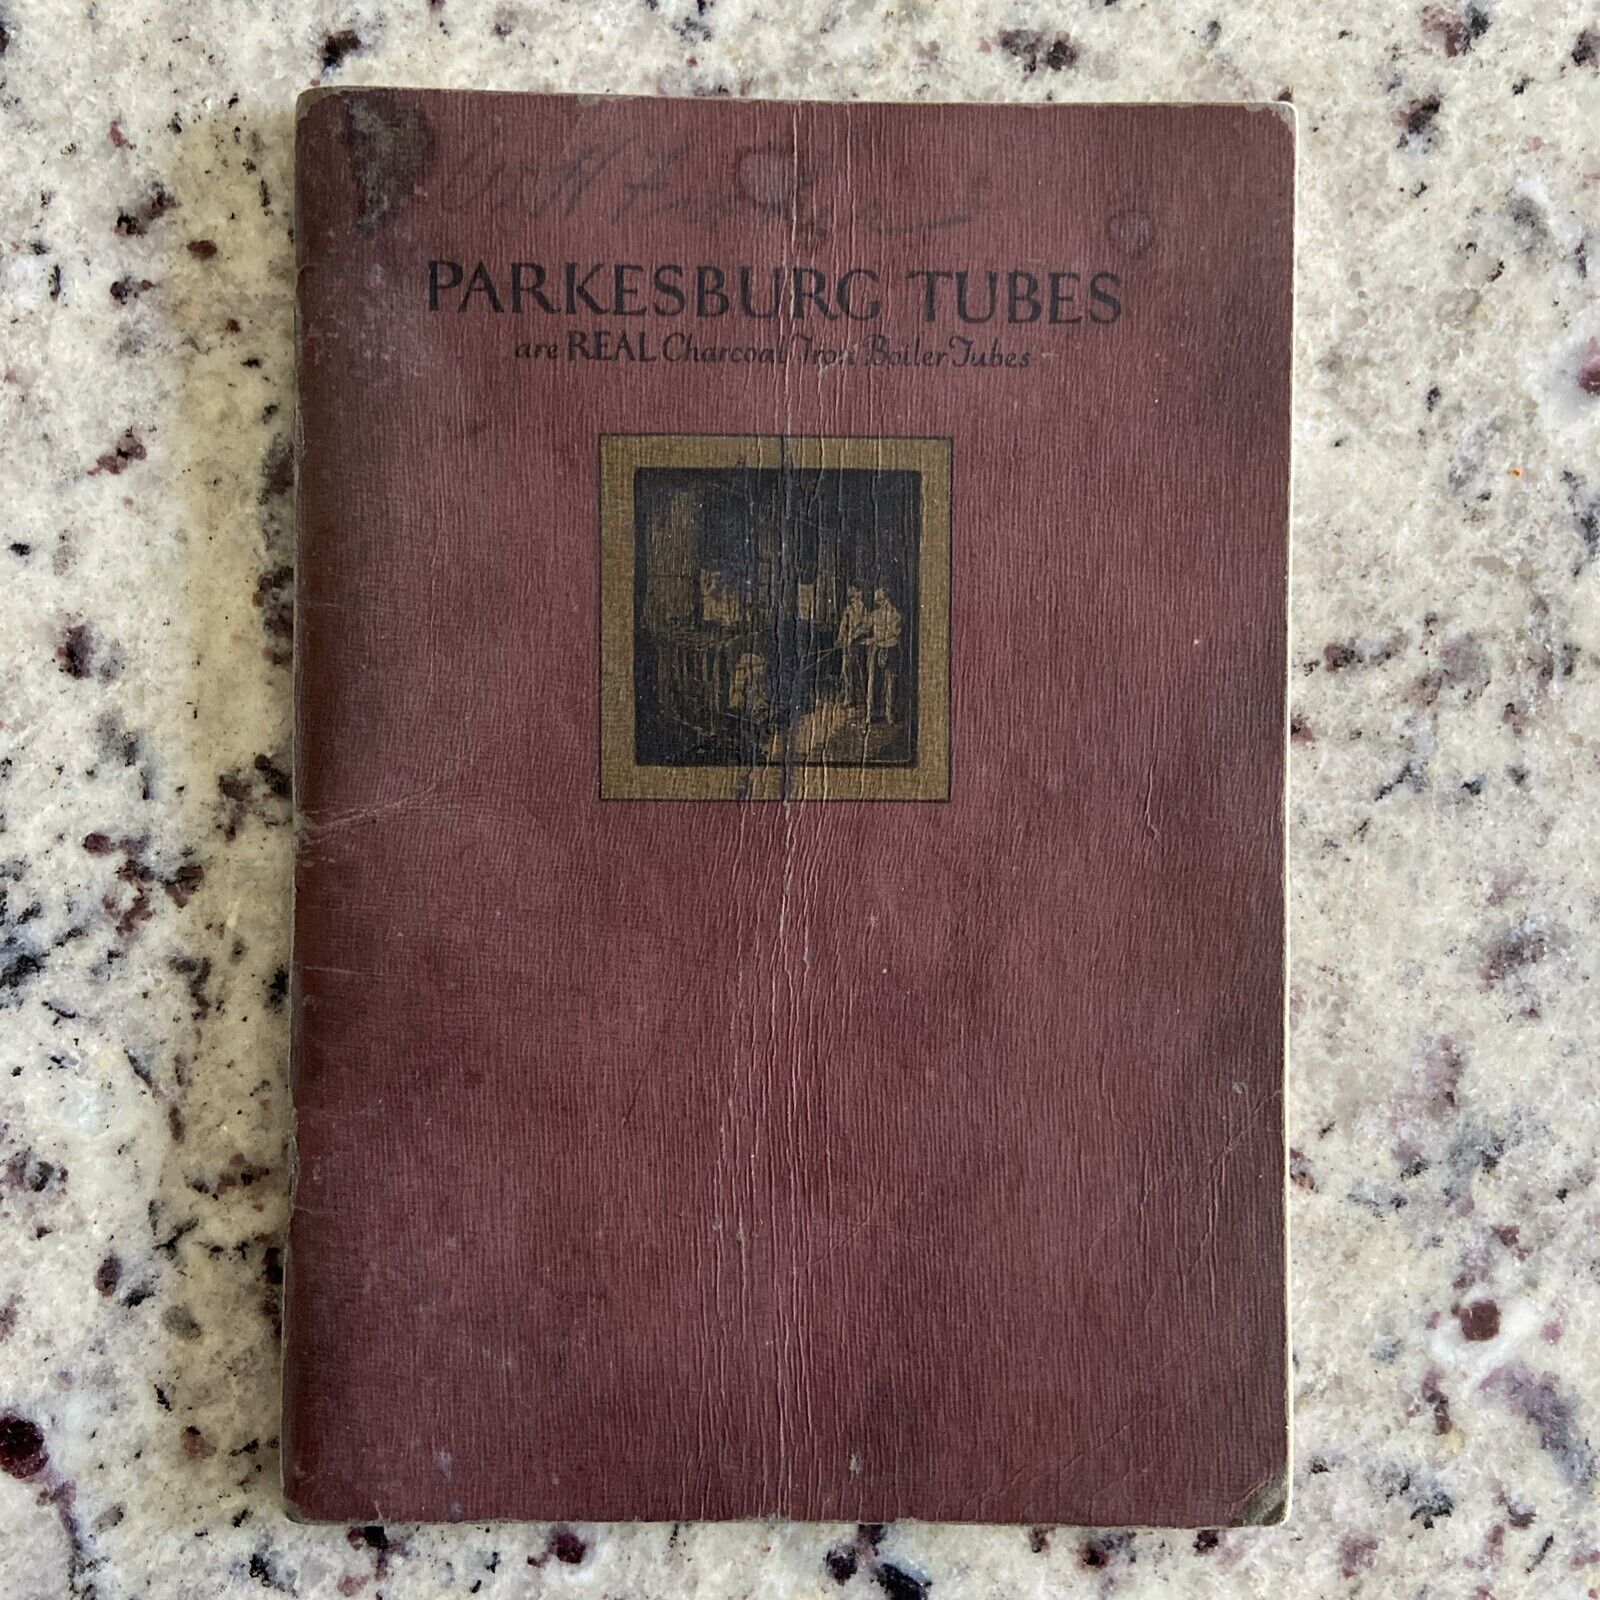 Antique 1923 Parkesburg Iron Co PA Charcoal Iron Boiler Tubes Advertising Guide